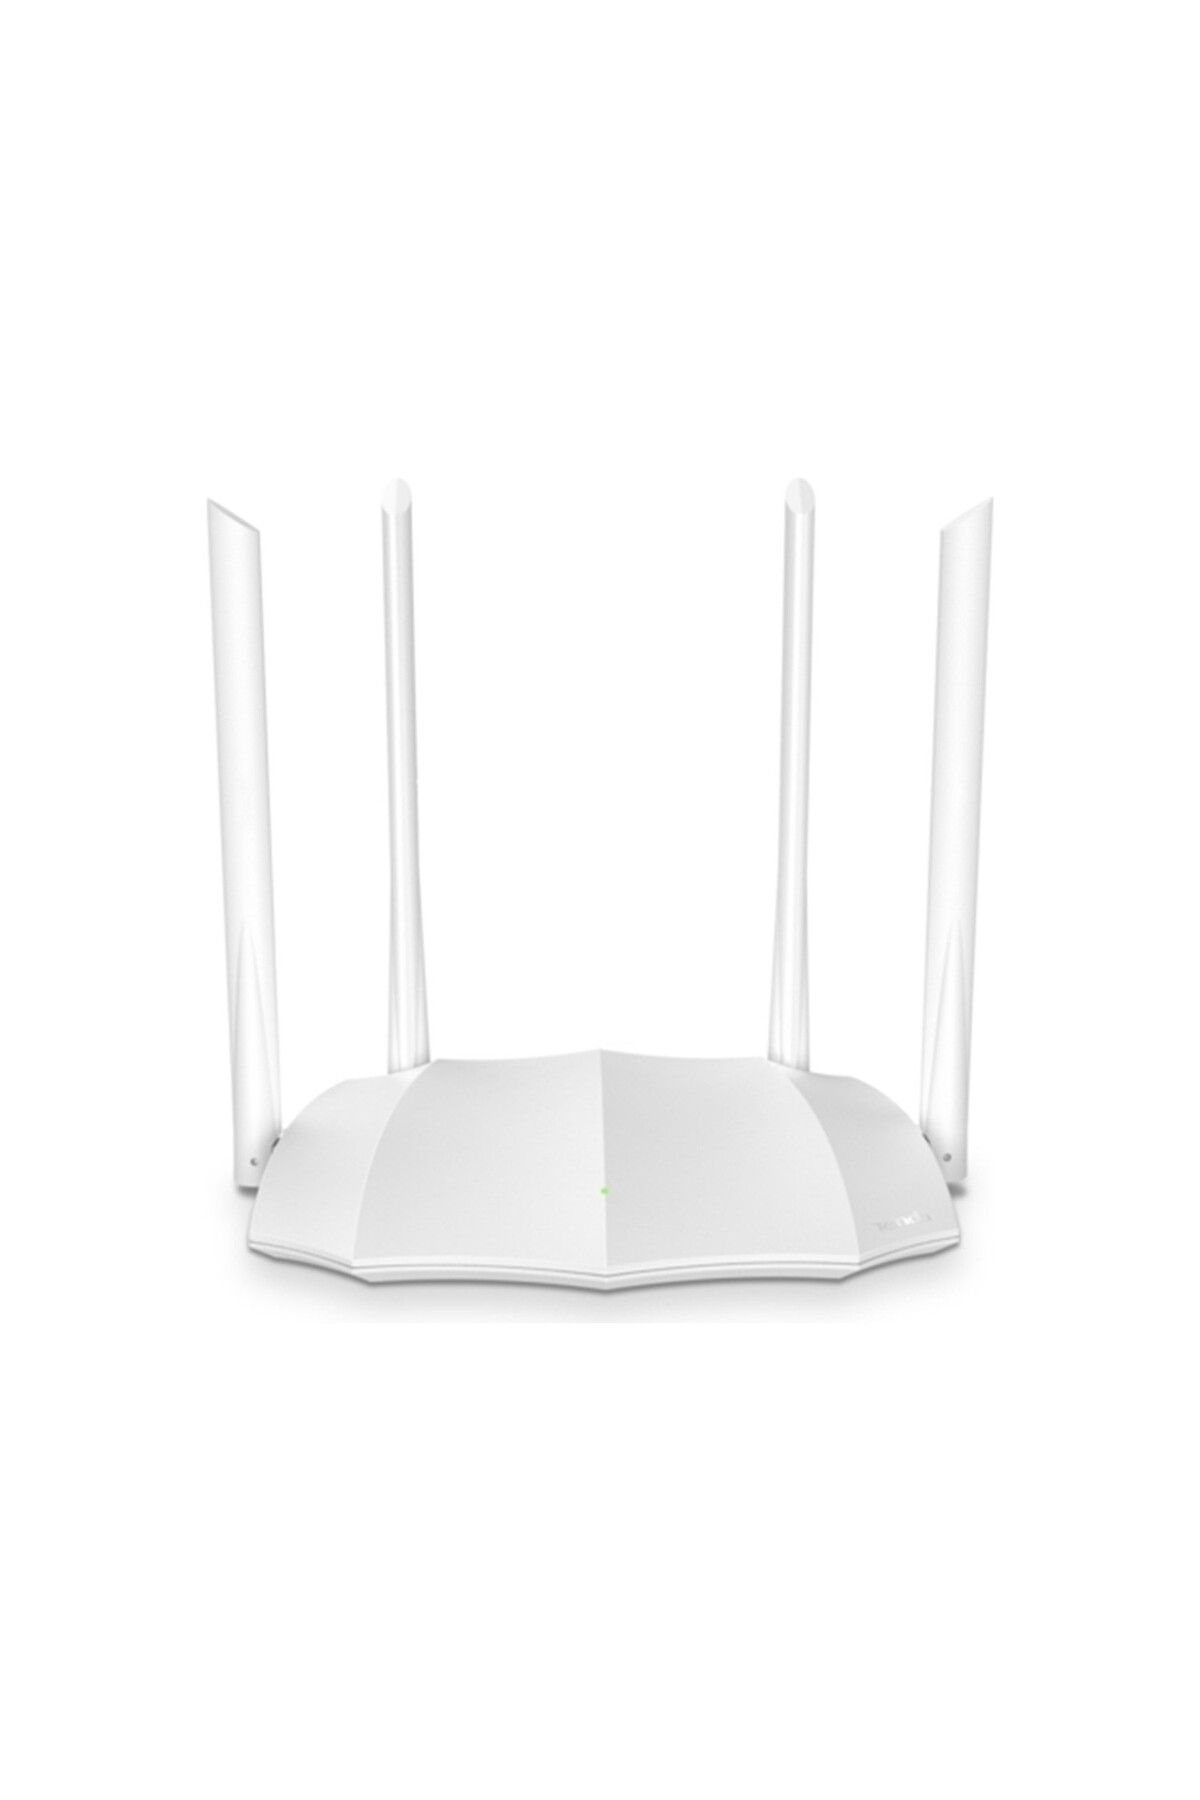 sommeow Tenda Ac5 V3 Ac1200 Dual Band Router Router/ap Access Point